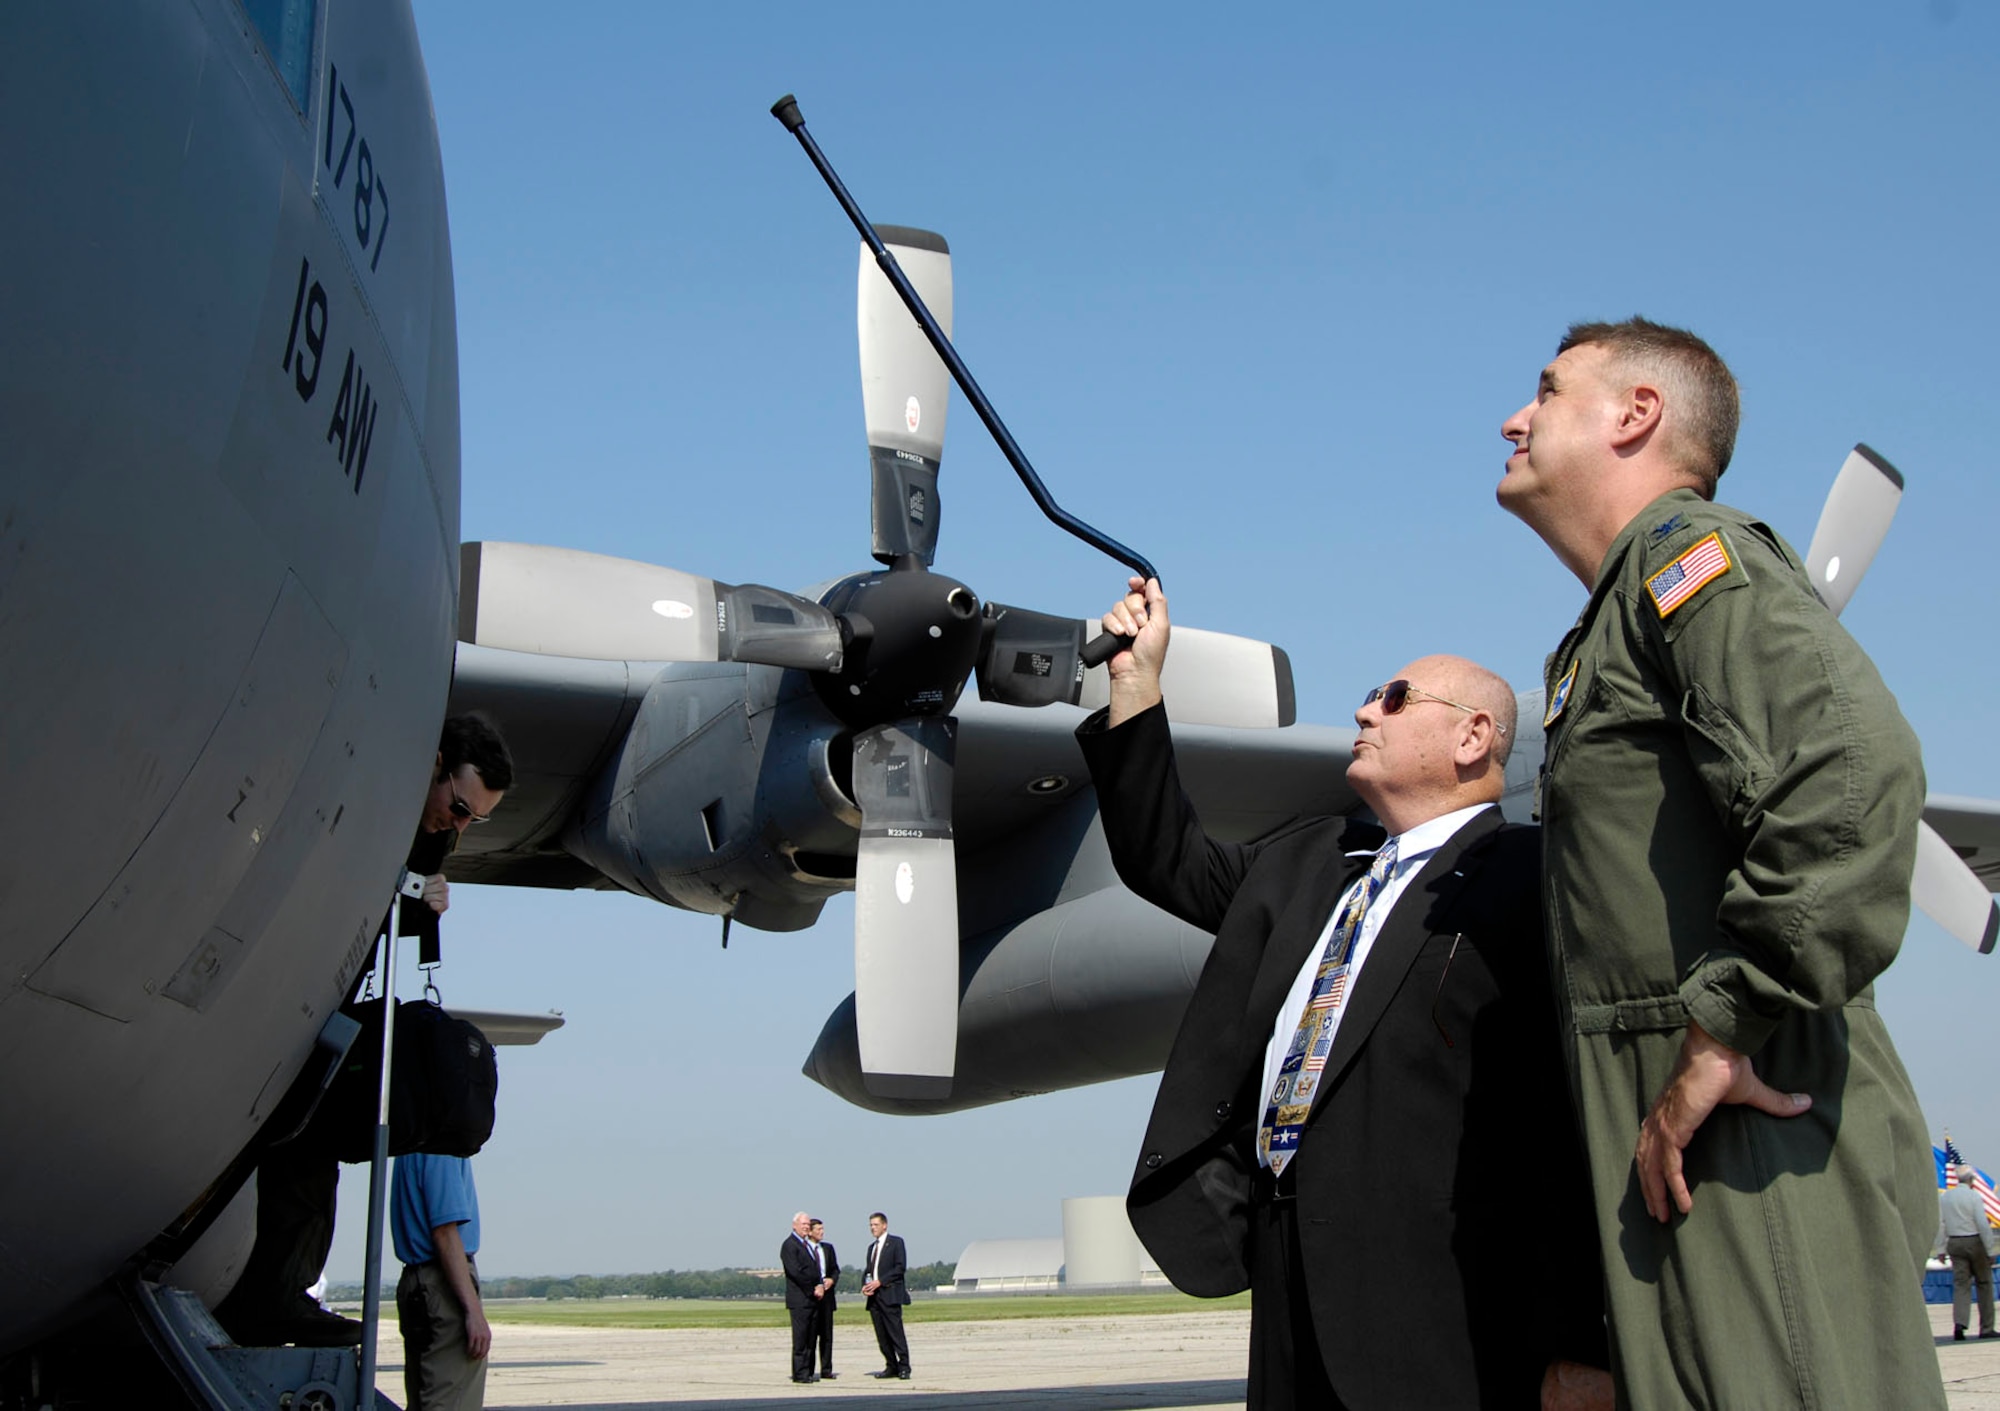 DAYTON, Ohio -- C-130E SPARE 617 made its final flight to the National Museum of the U.S. Air Force on Aug. 18, 2011. Here, Col. Michael A. Minihan (right), commander of the 19th Airlift Wing, talks about the C-130E with Col. (Ret.) William Caldwell, who received the Air Force Cross while piloting the aircraft during the Southeast Asia War. (U.S. Air Force photo by Michelle Gigante)